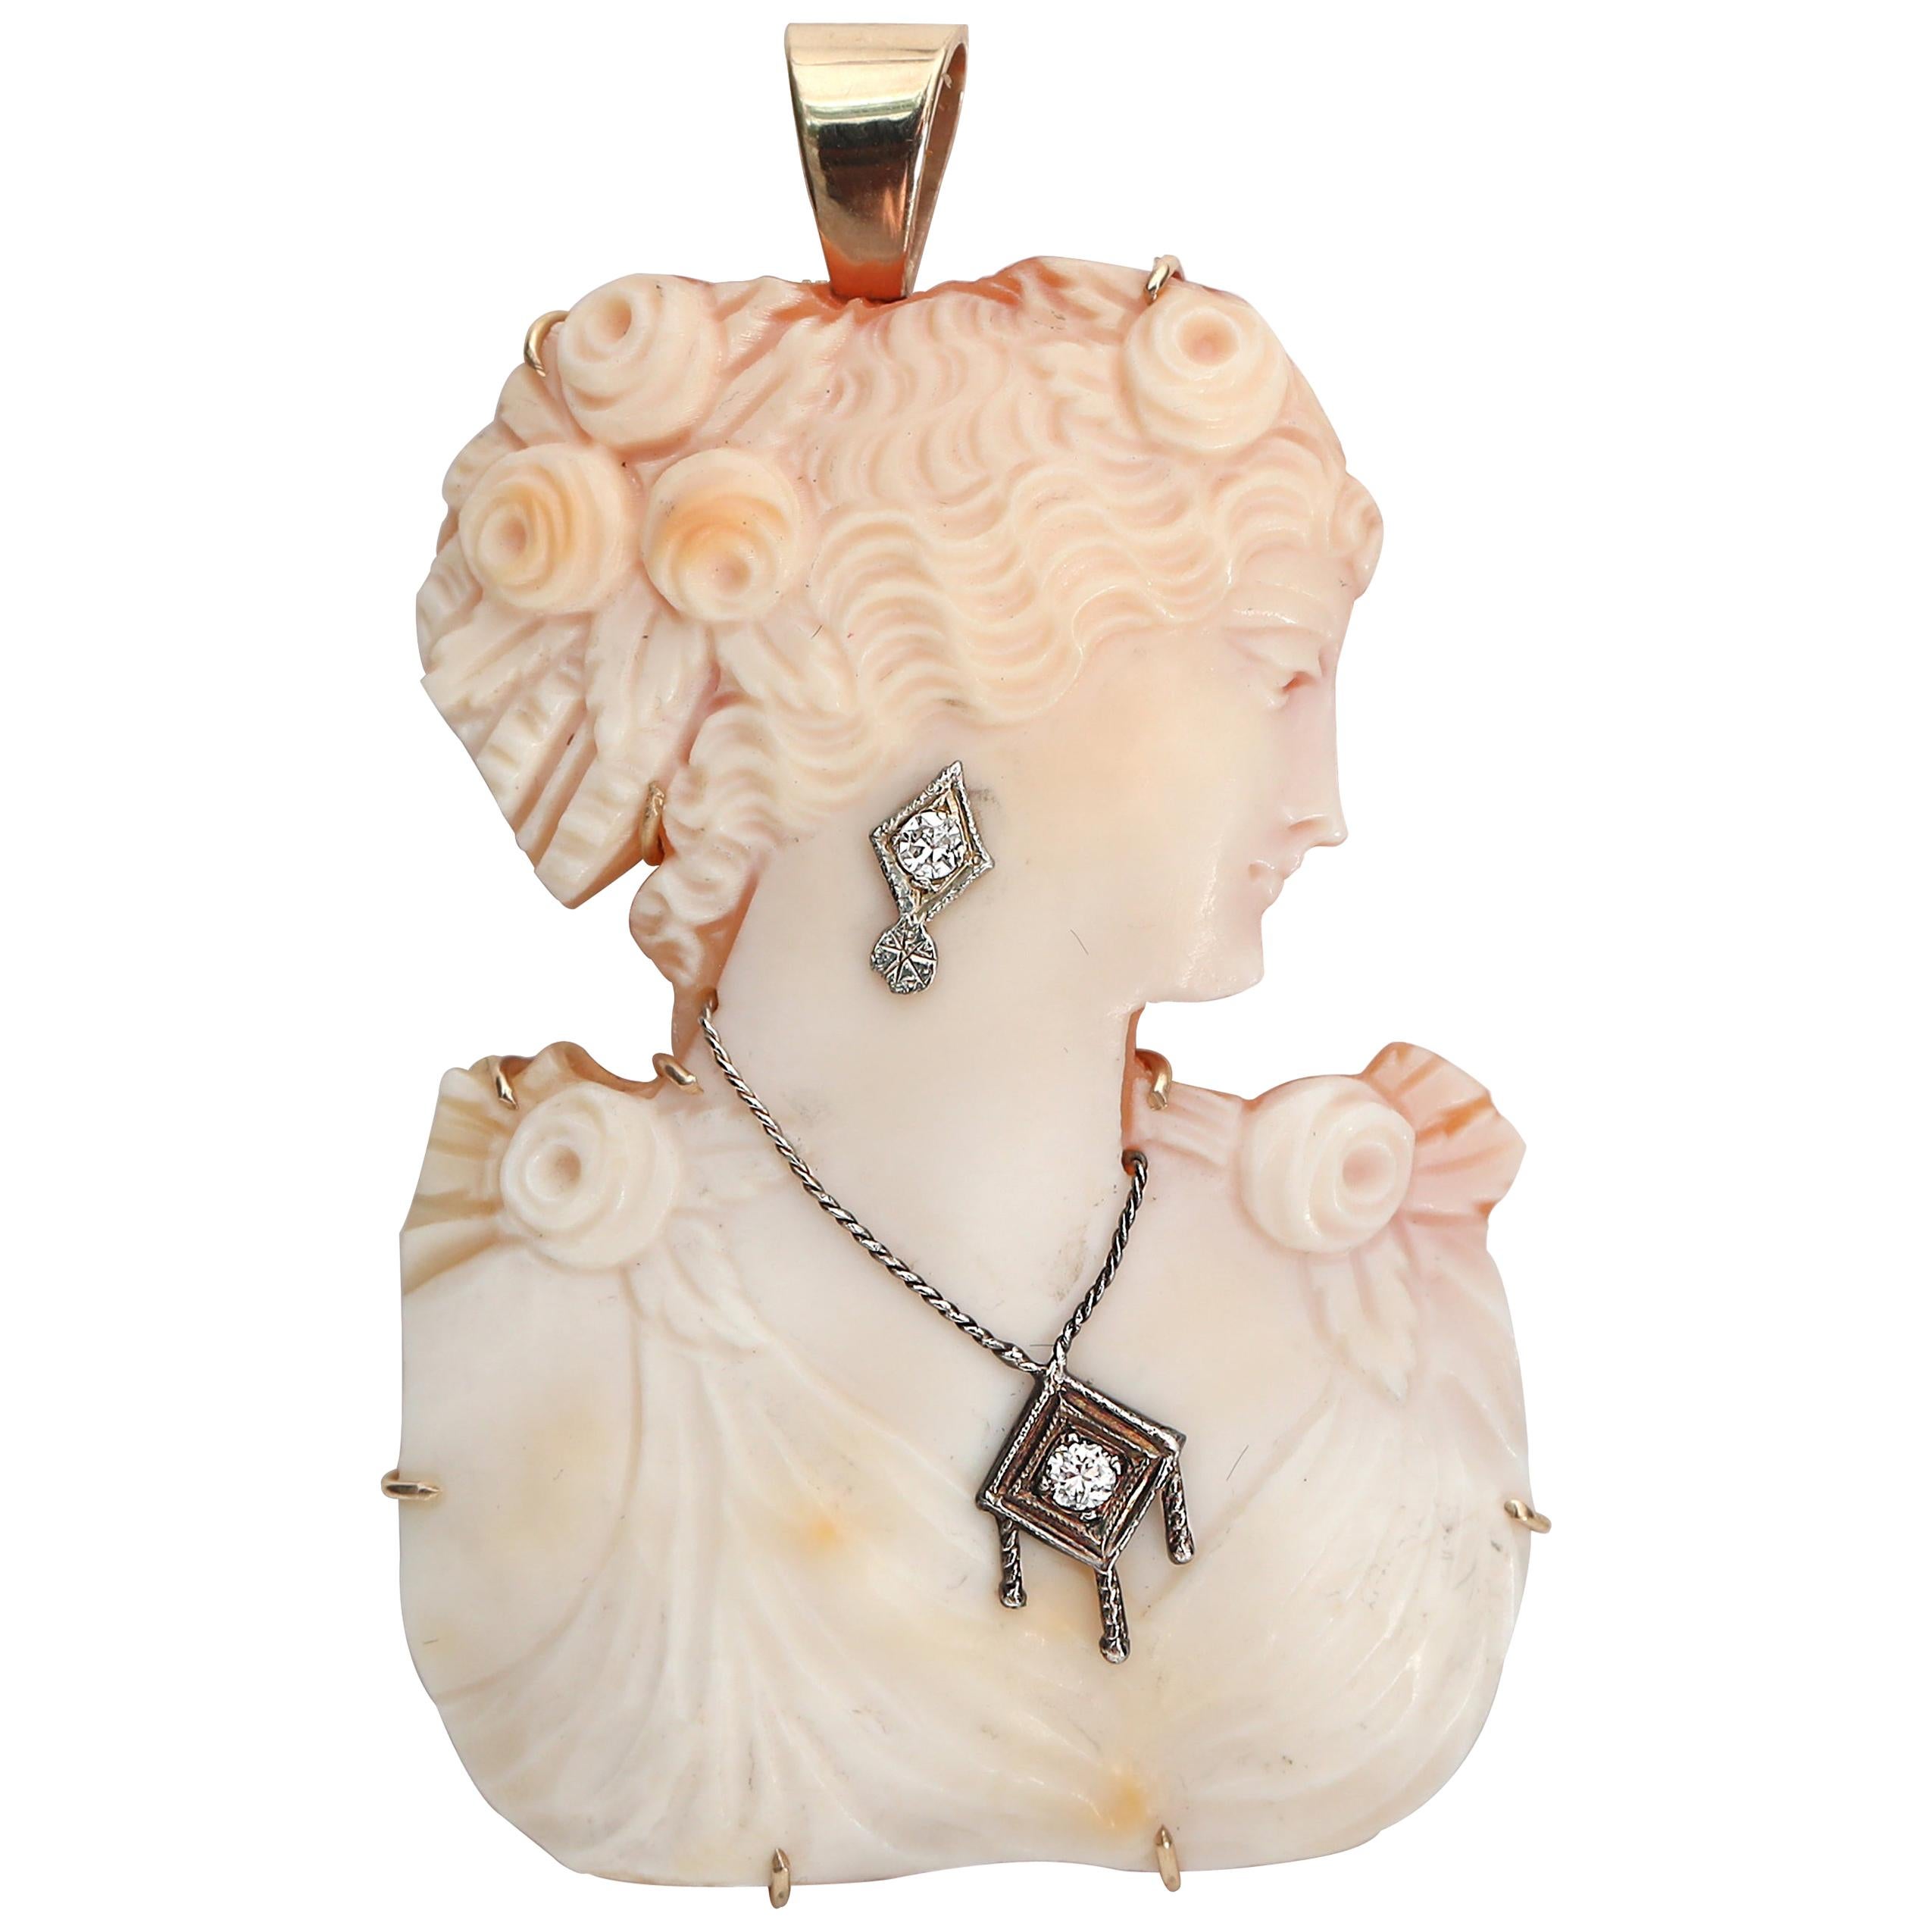 Carved Shell Cameo Woman Bust Silhouette Diamond Accents 14 Karat Gold Pendant